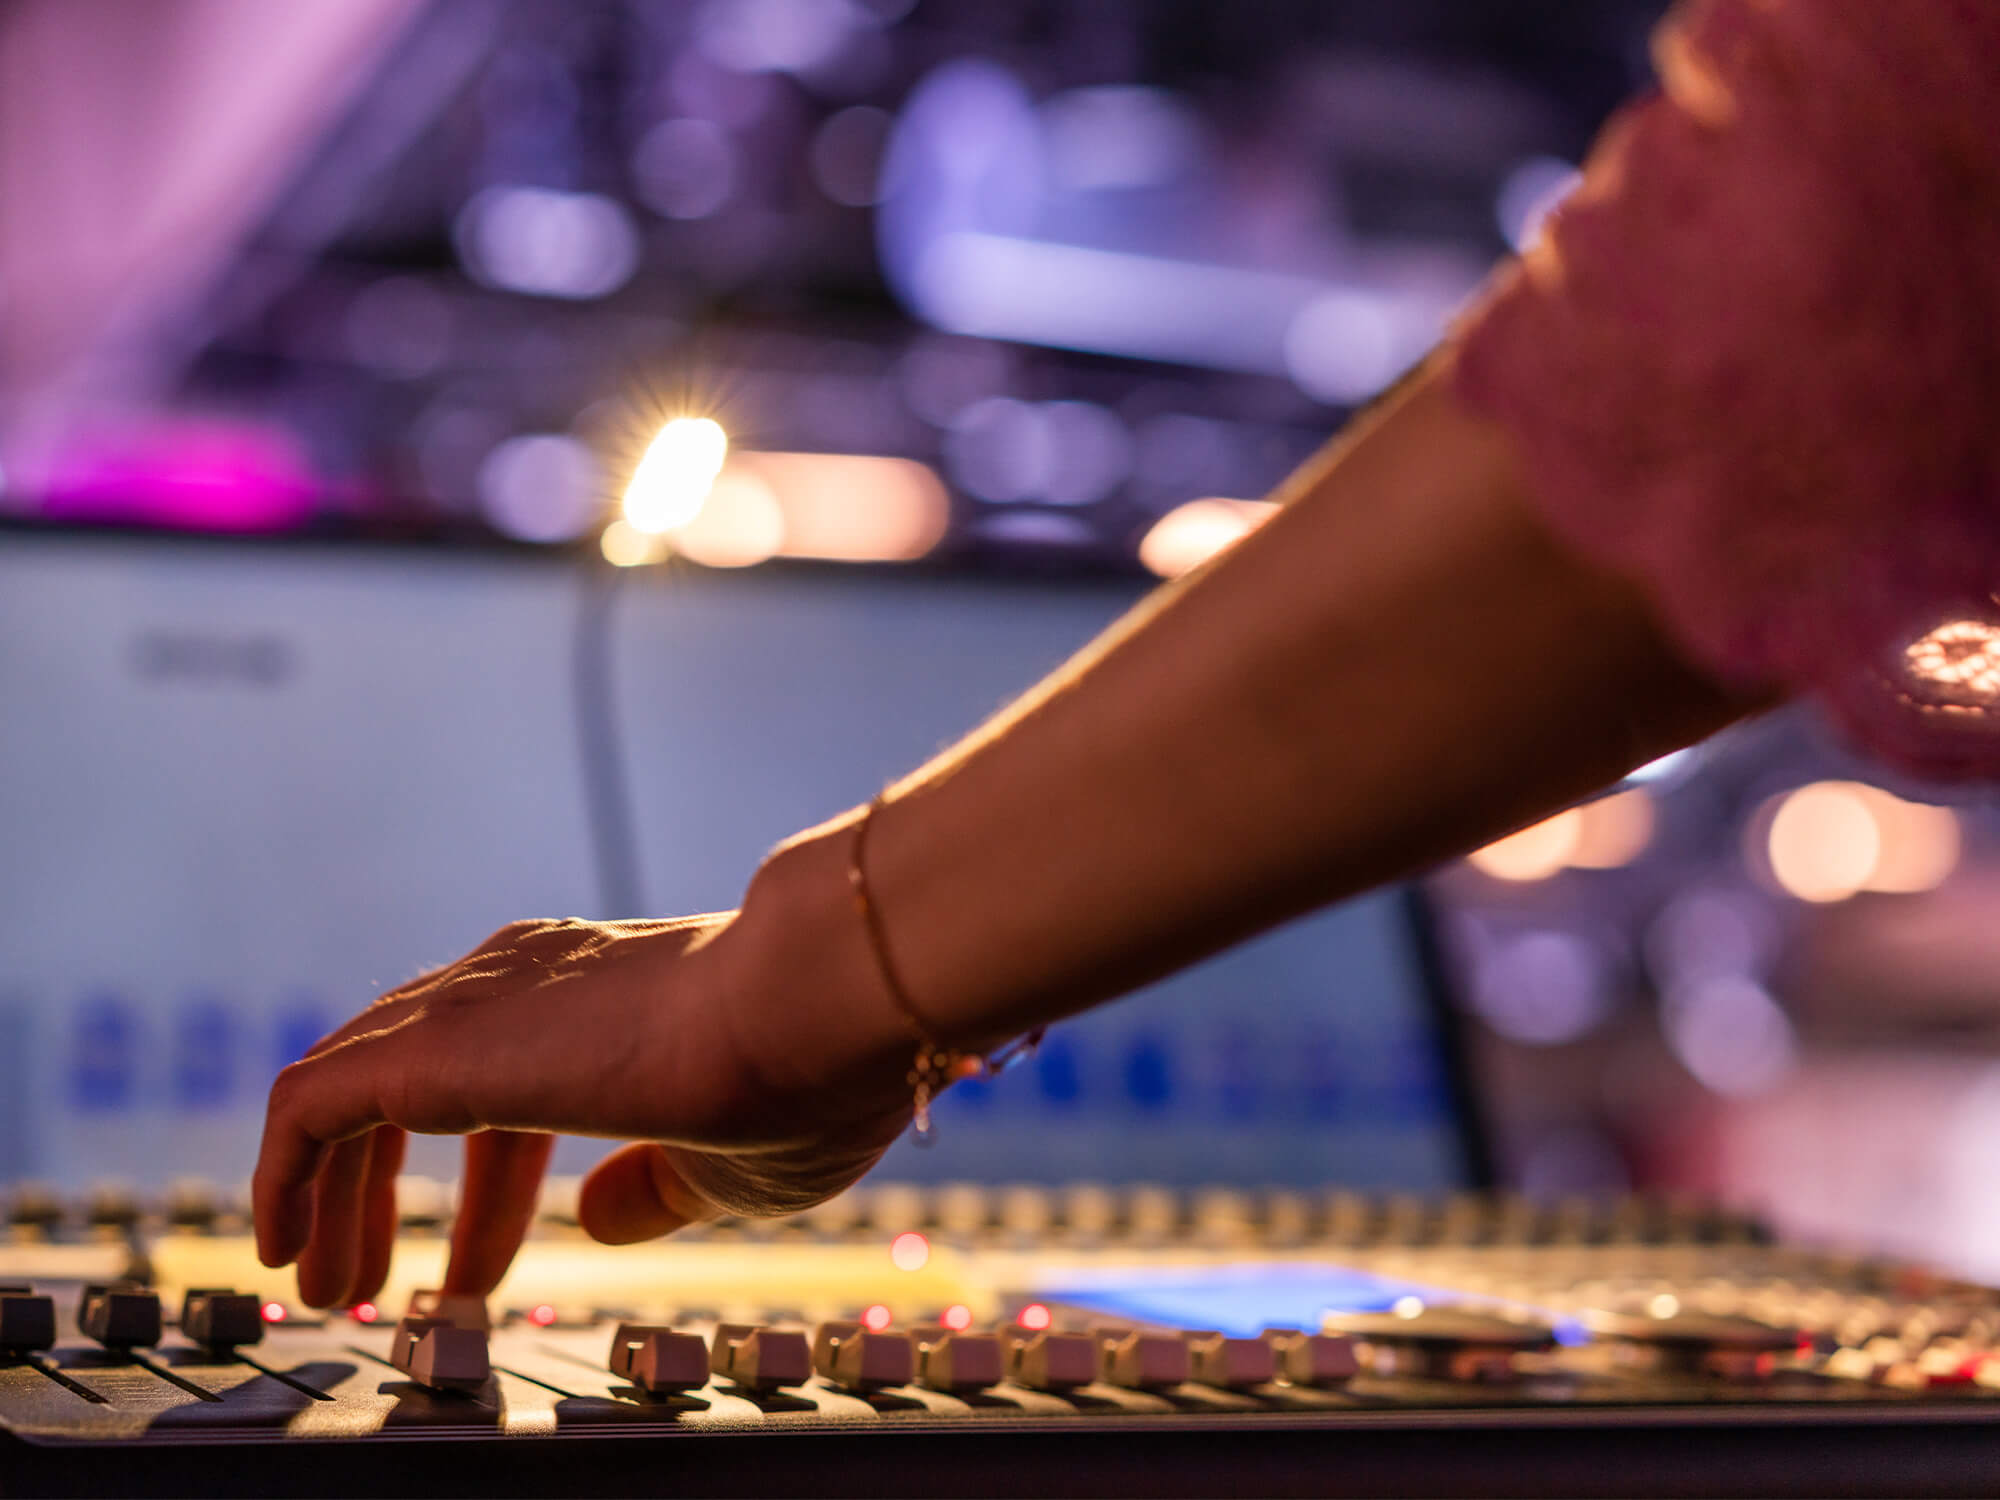 A hand on a recording console adjusting a slider